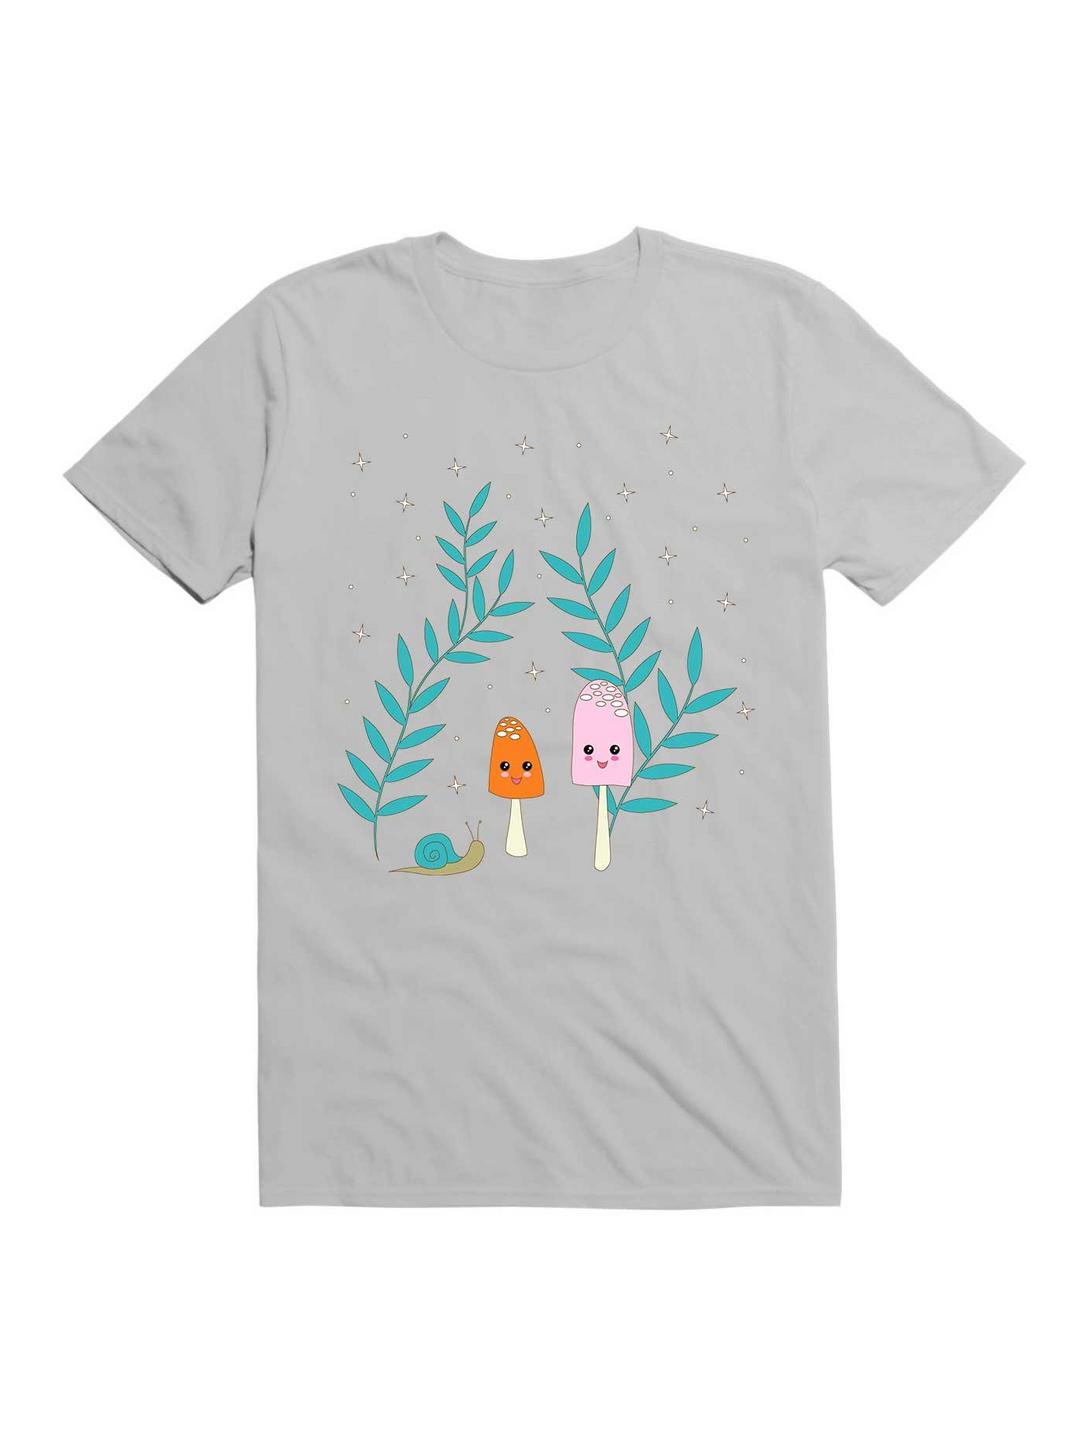 Kawaii Mushrooms In The Forest With Snail T-Shirt, ICE GREY, hi-res